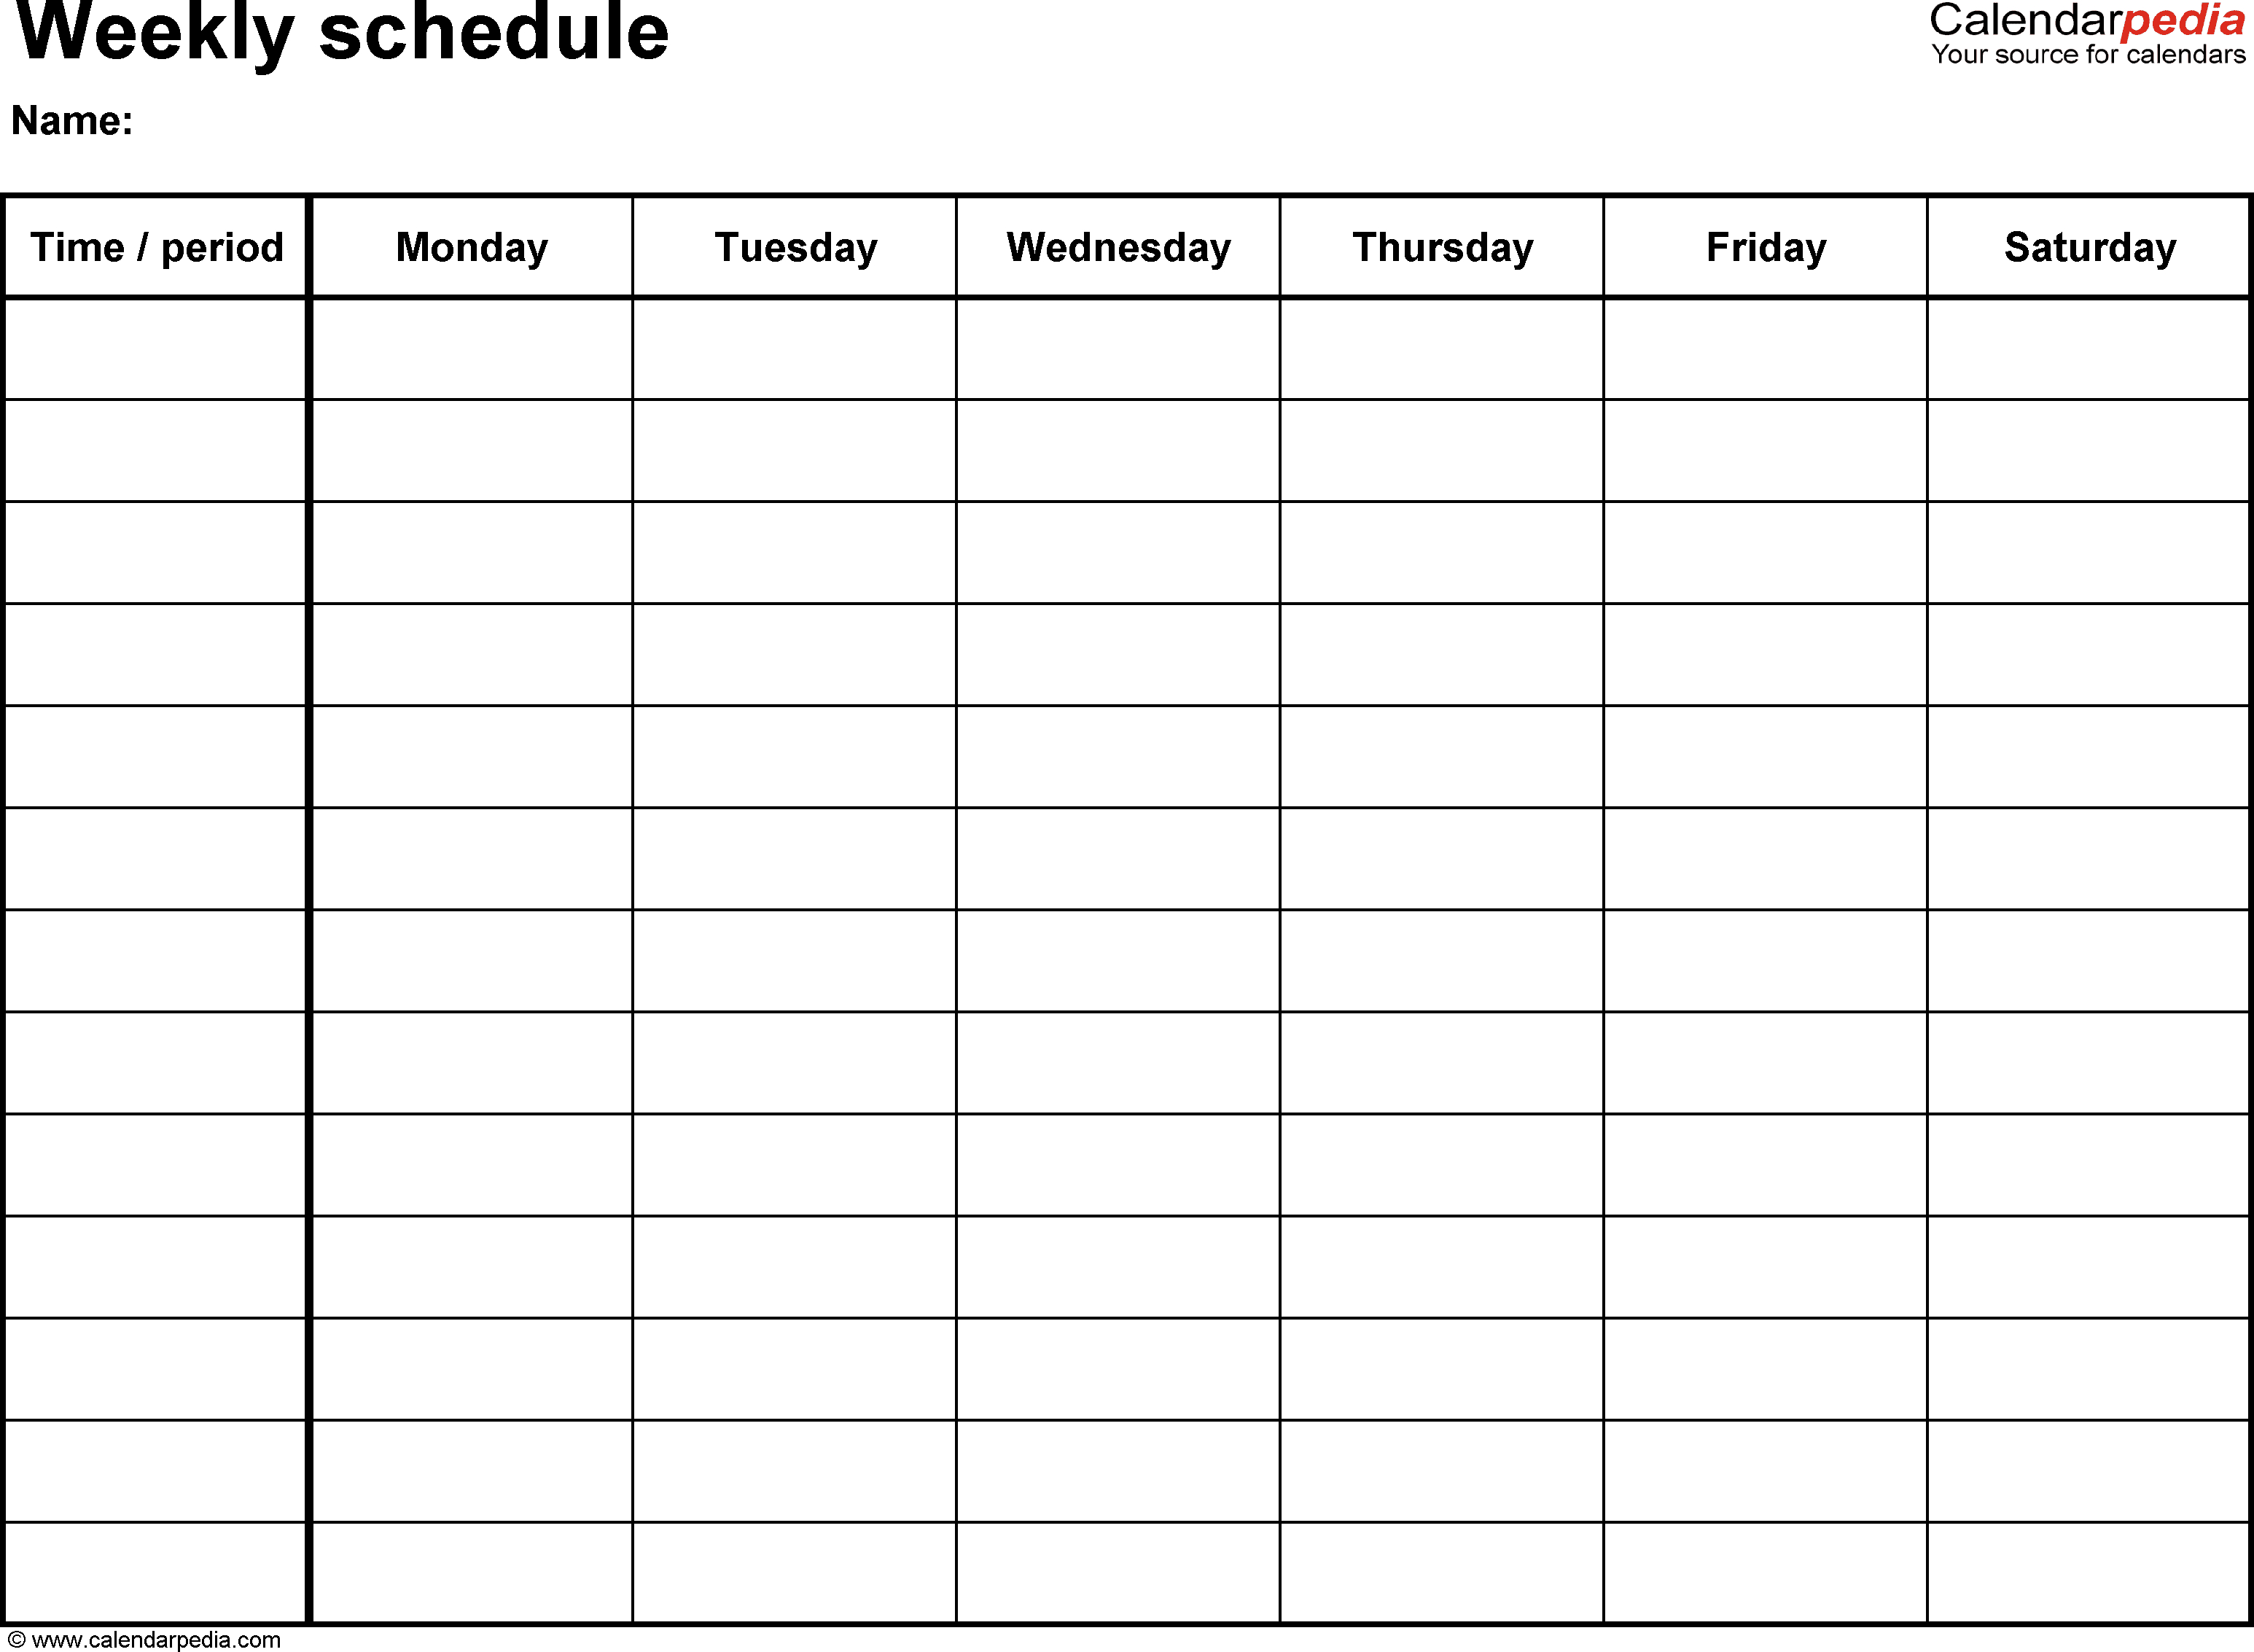 Weekly Downloadable Calendar  Bolan.horizonconsulting.co pertaining to Printable Weekly Calendar Template With Time Slots